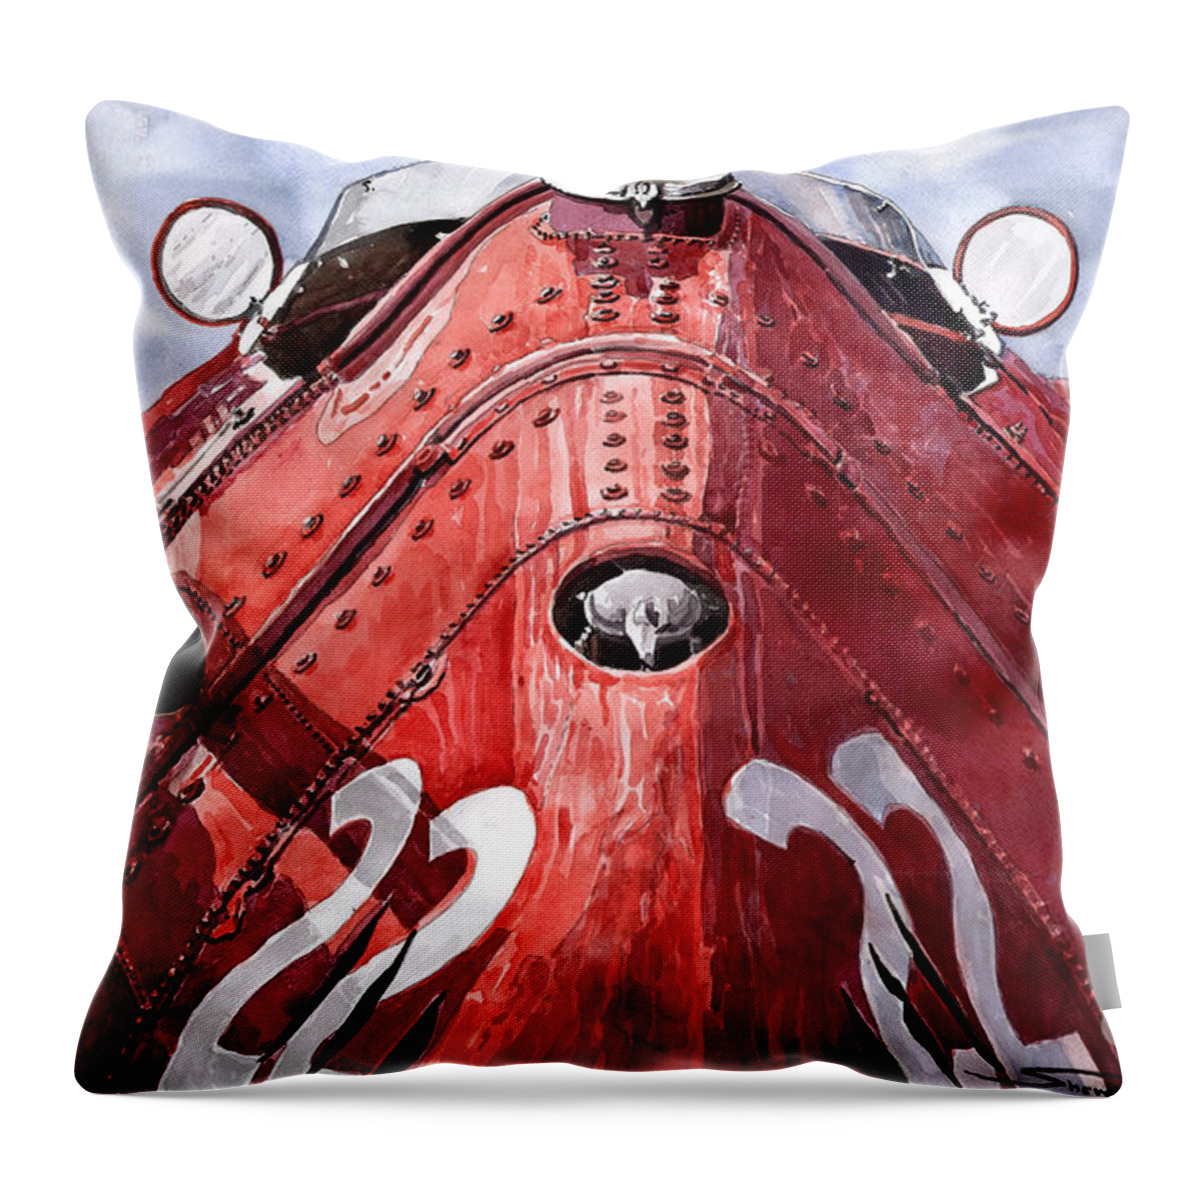 Watercolour Throw Pillow featuring the painting Maserati 250F Alien by Yuriy Shevchuk